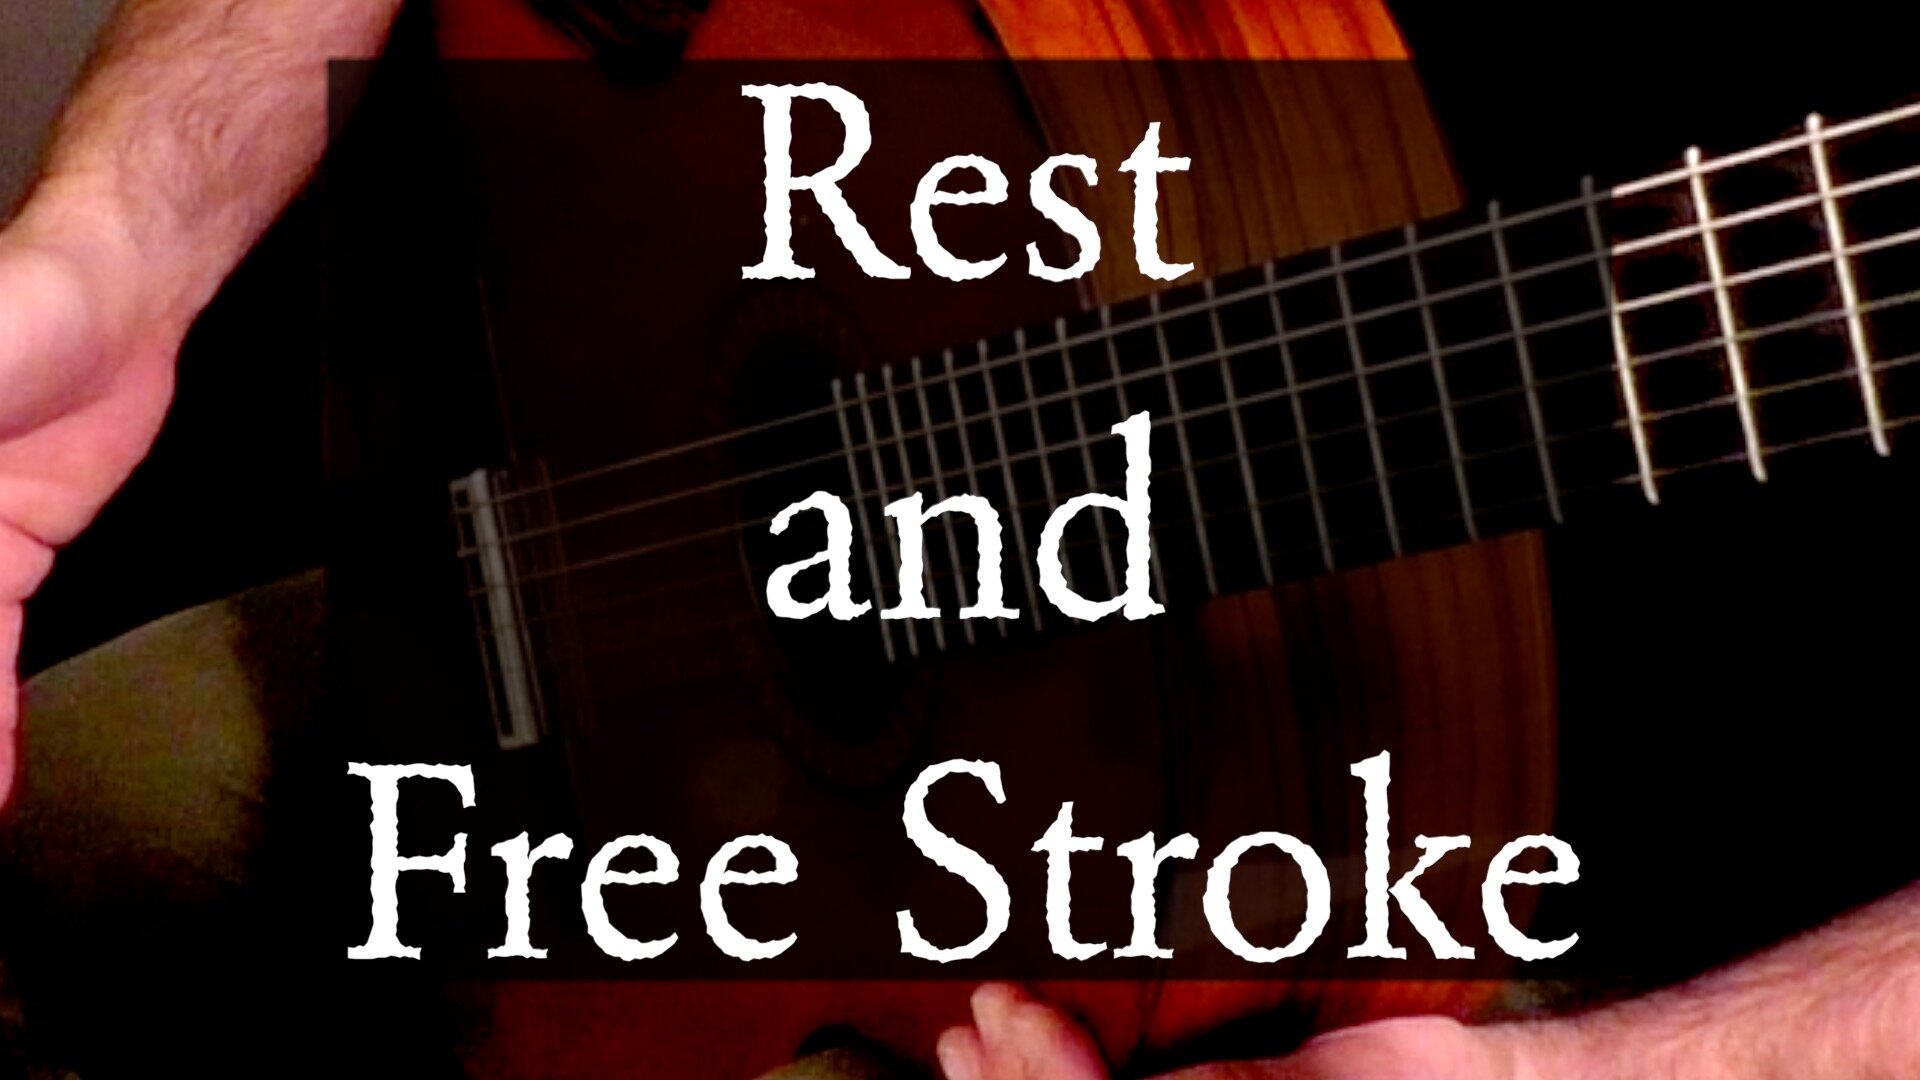 Rest and Free Stroke